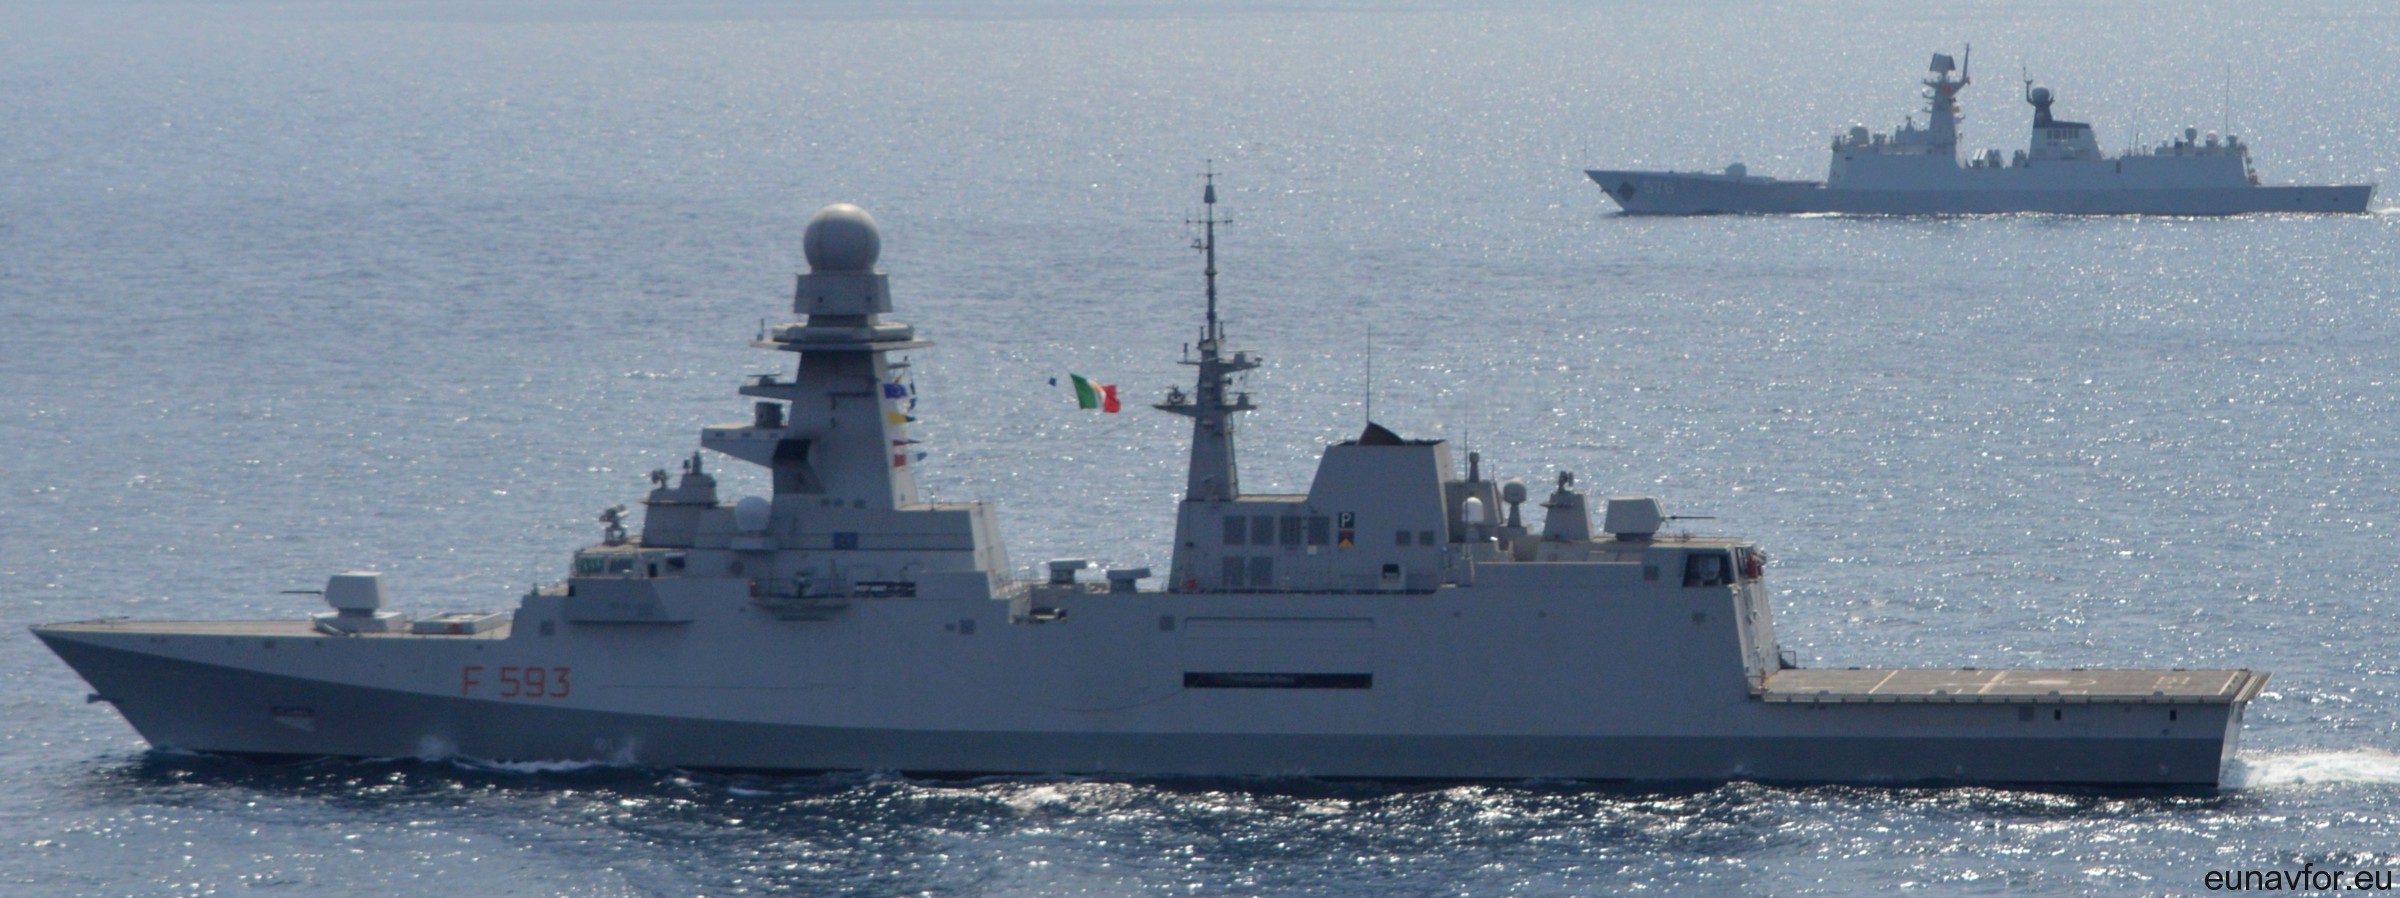 f-593 carabiniere its nave bergamini fremm class guided missile frigate italian navy marina militare 28 eunavfor med